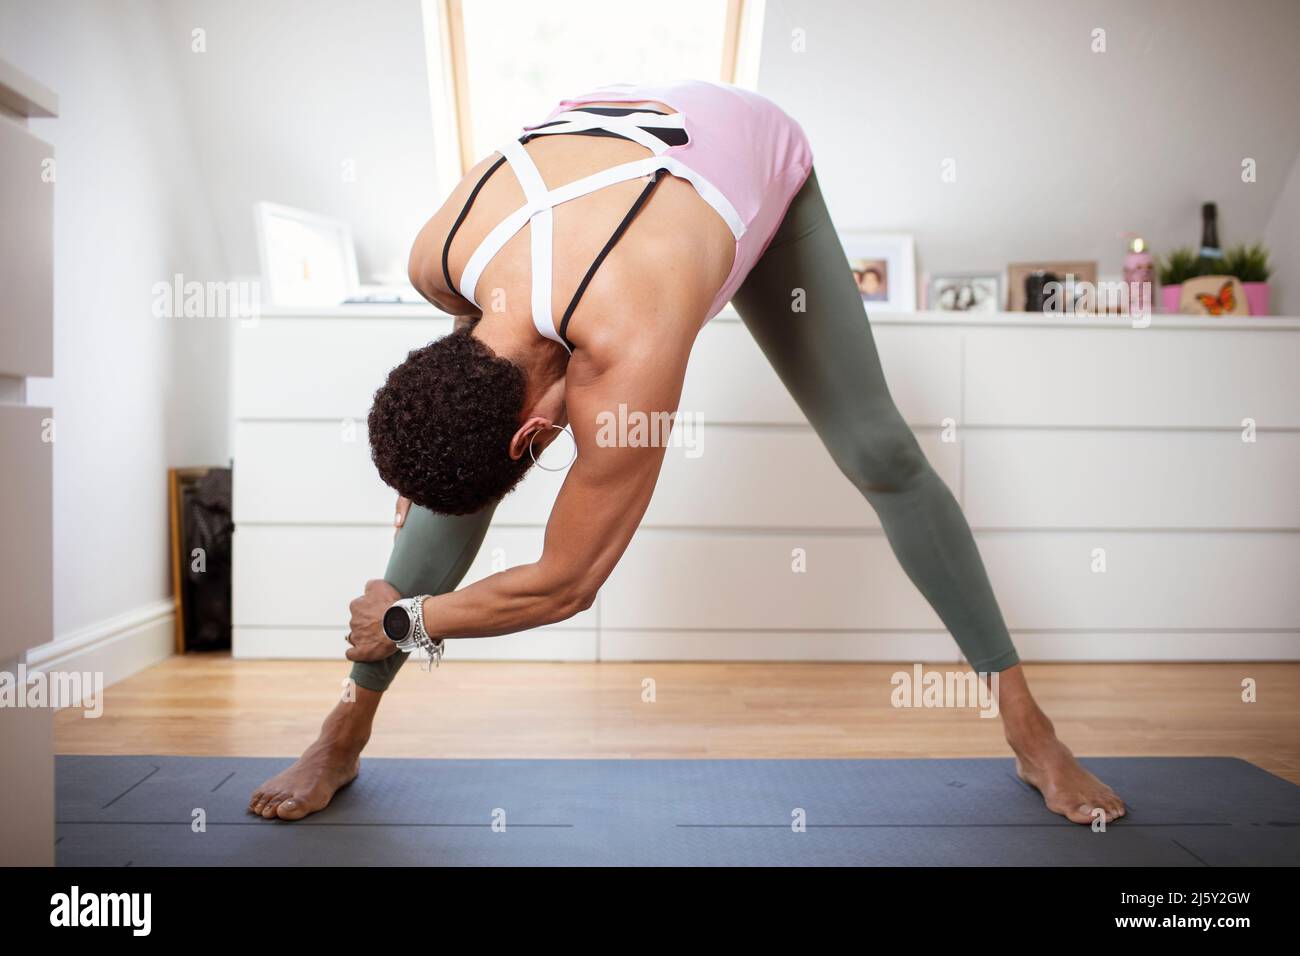 Woman exercising, stretching on yoga mat at home Stock Photo